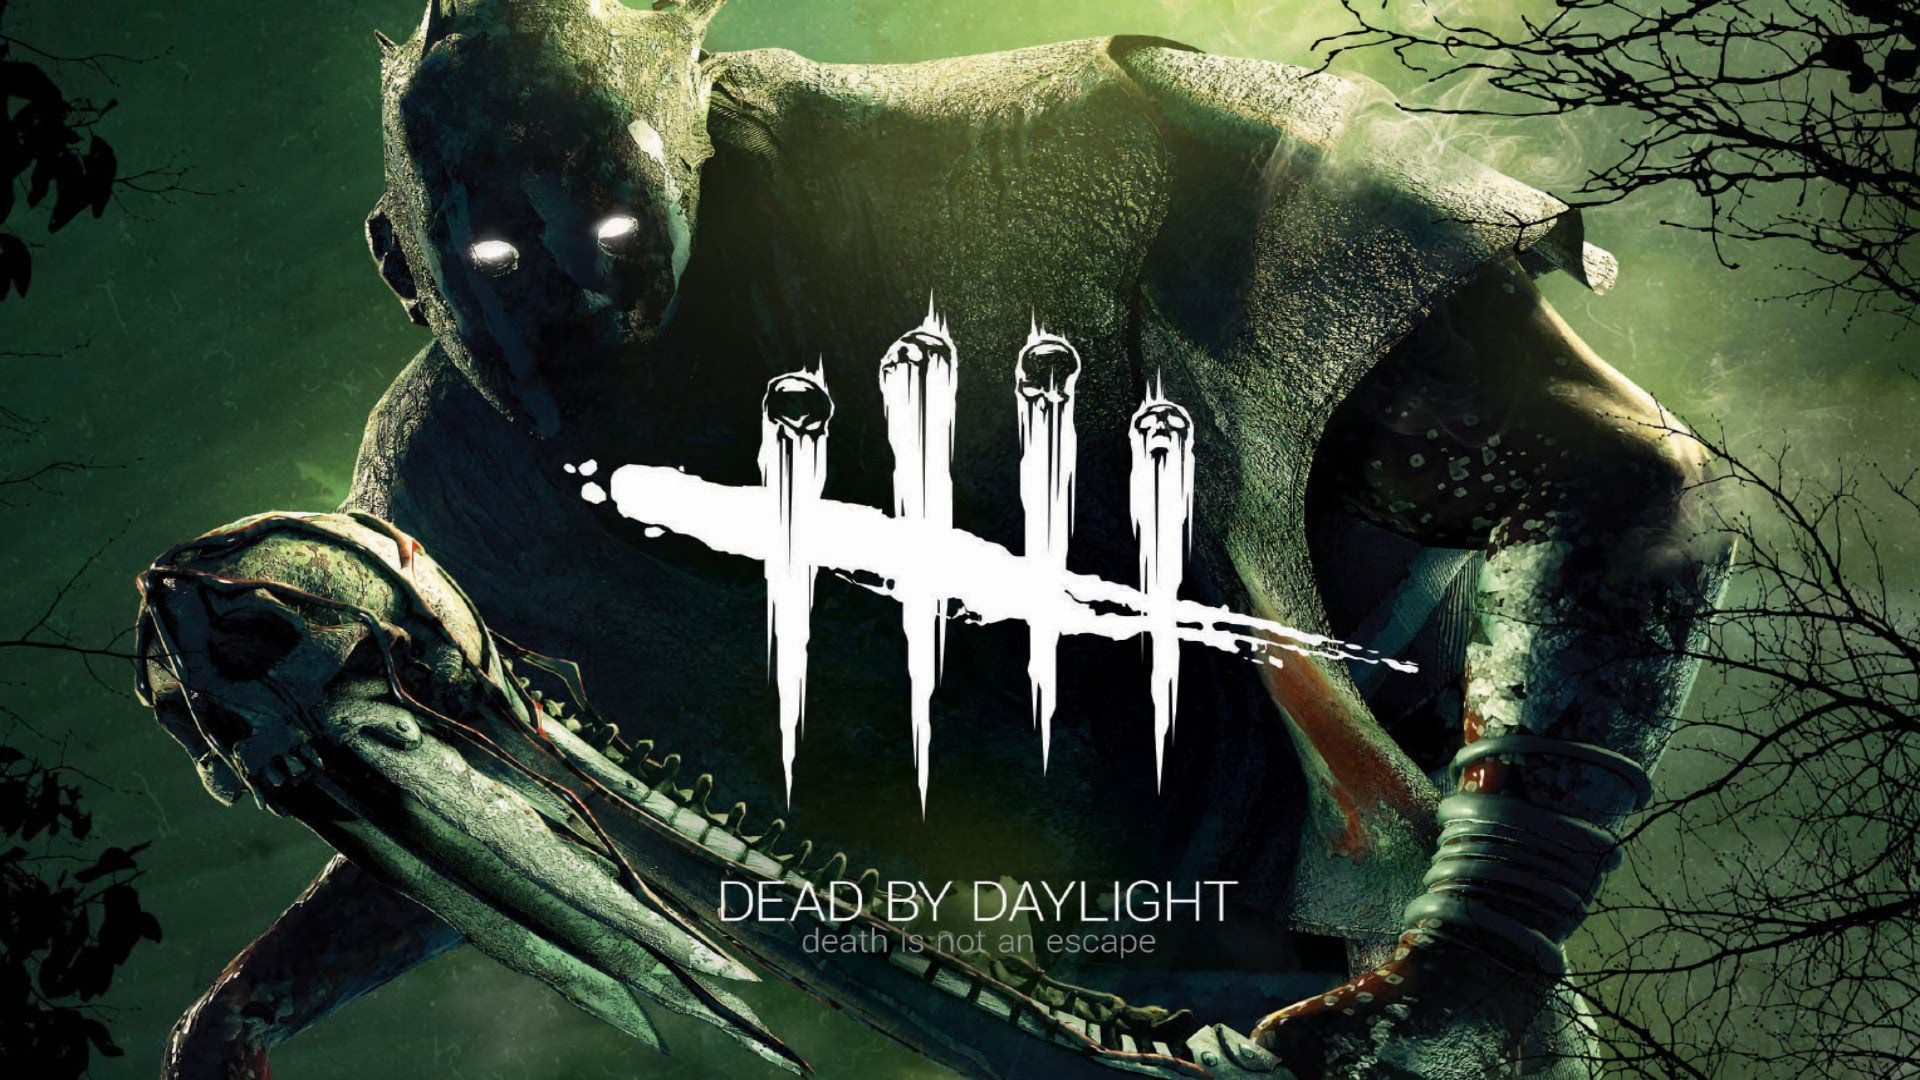 Download full hd 1920x1080 Dead By Daylight PC background ID:63280 for free